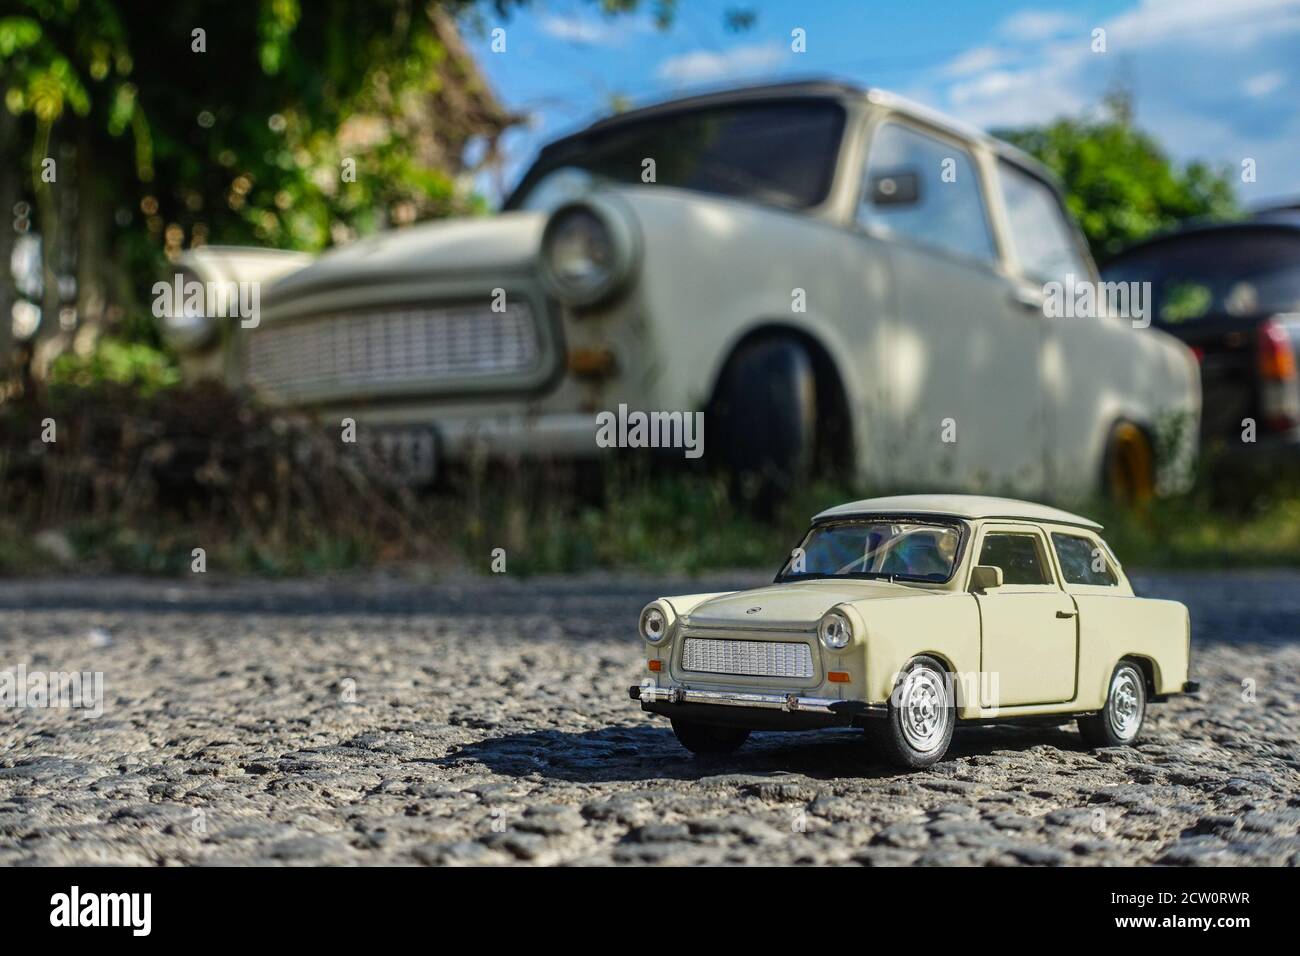 Toy Trabant with a real one in the background wallpaper, German retro car wallpaper Stock Photo